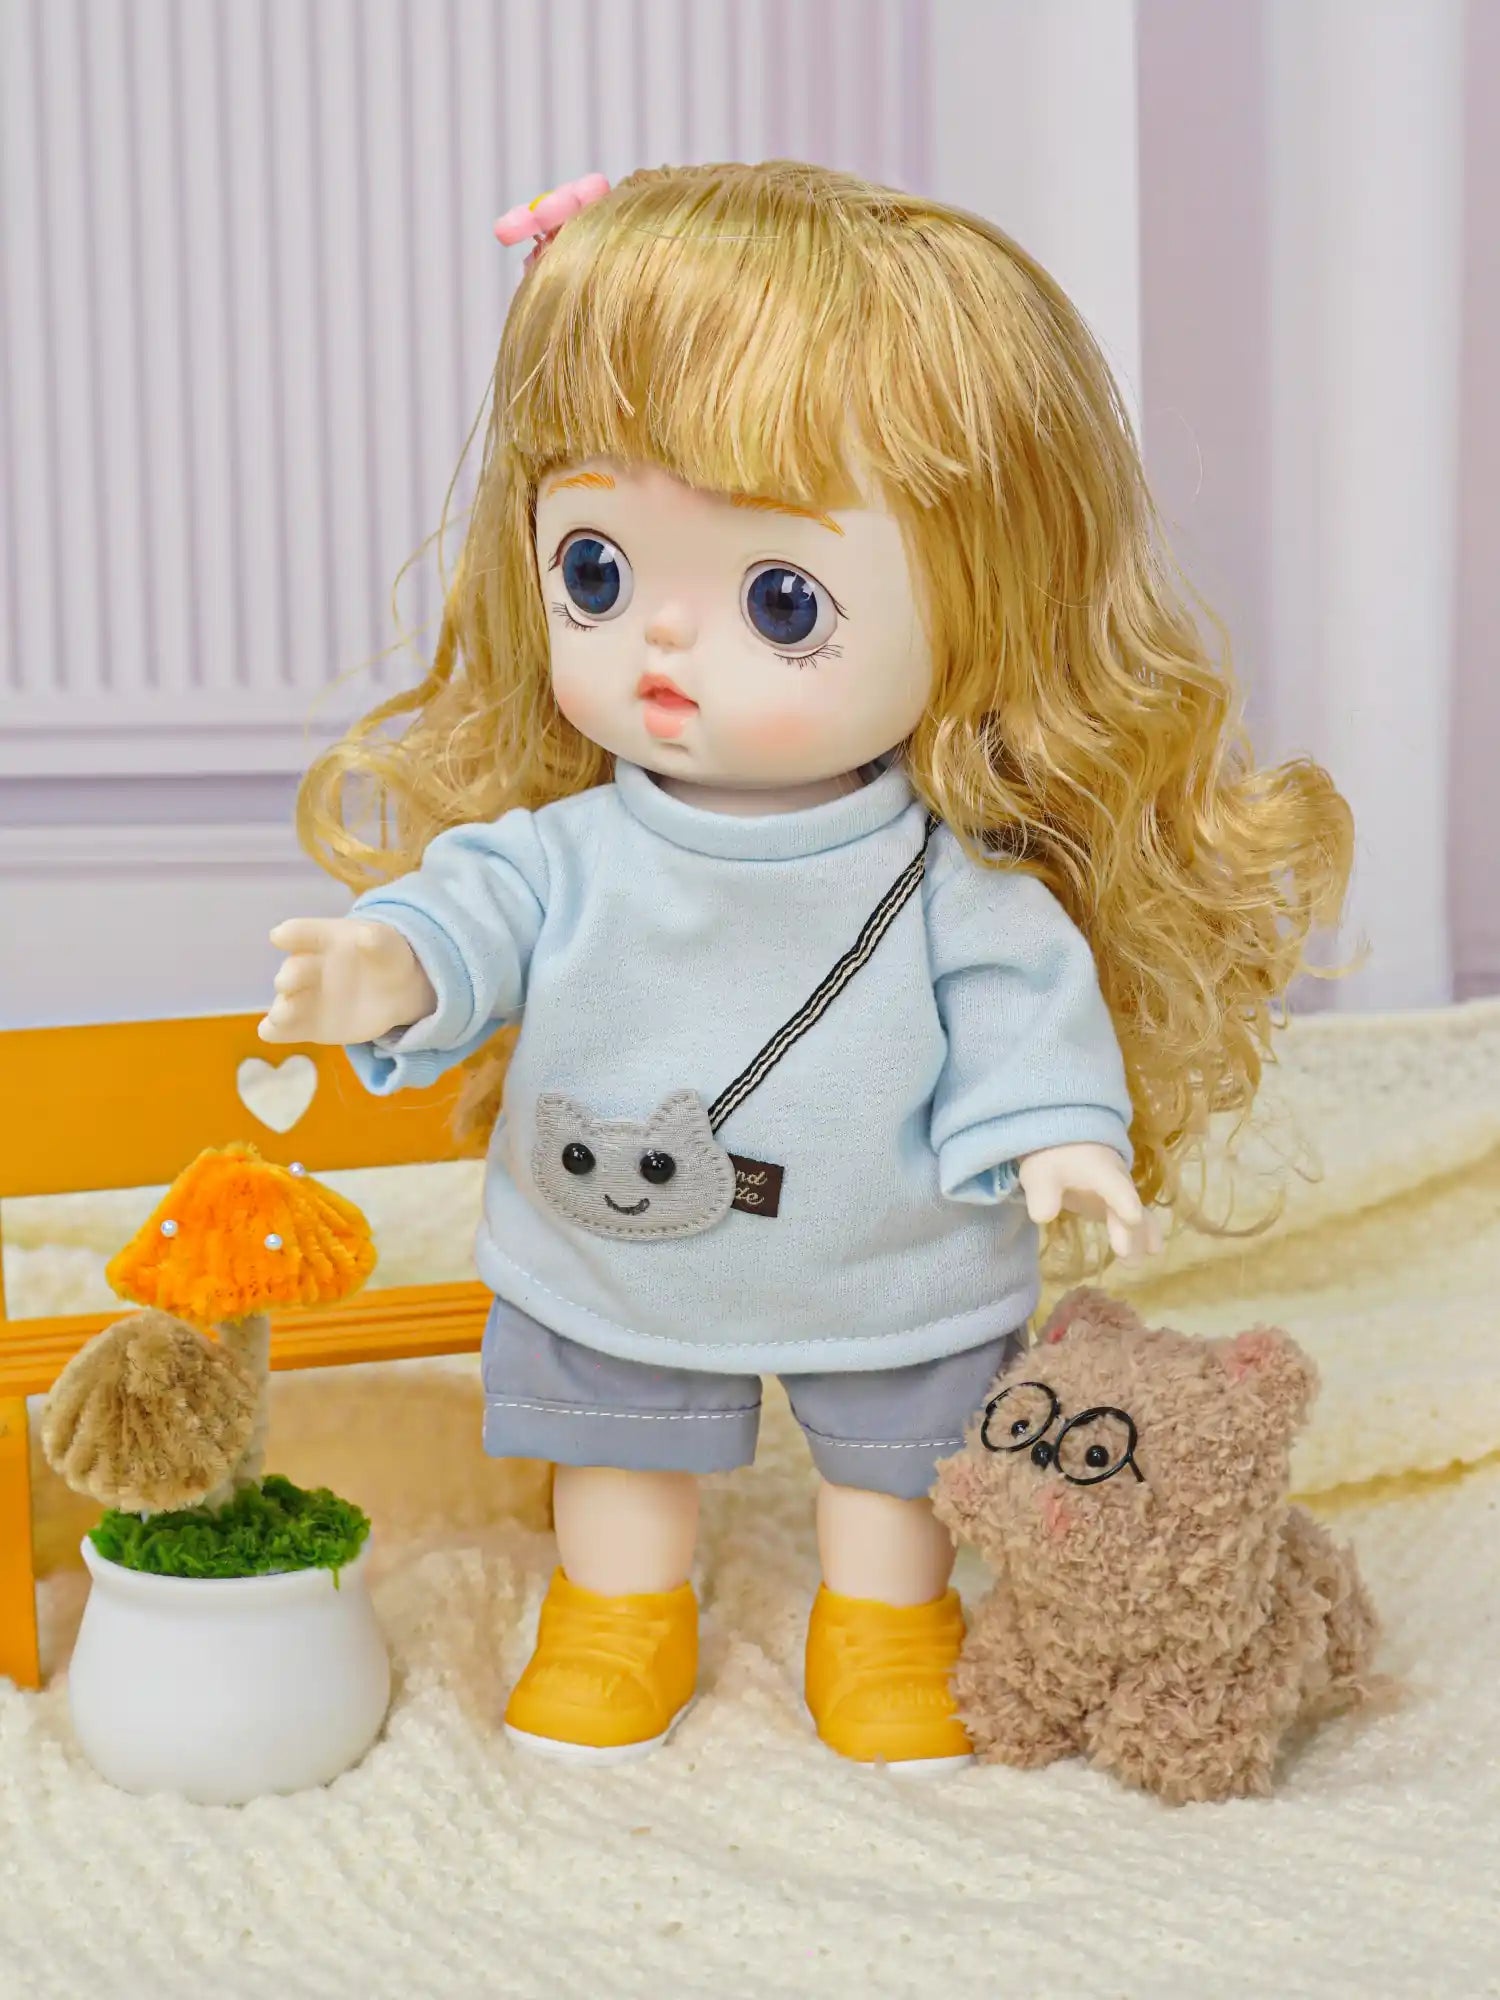 A golden-haired doll with a pink hair clip stands next to a plush animal and a miniature Eiffel Tower, evoking a Parisian theme.